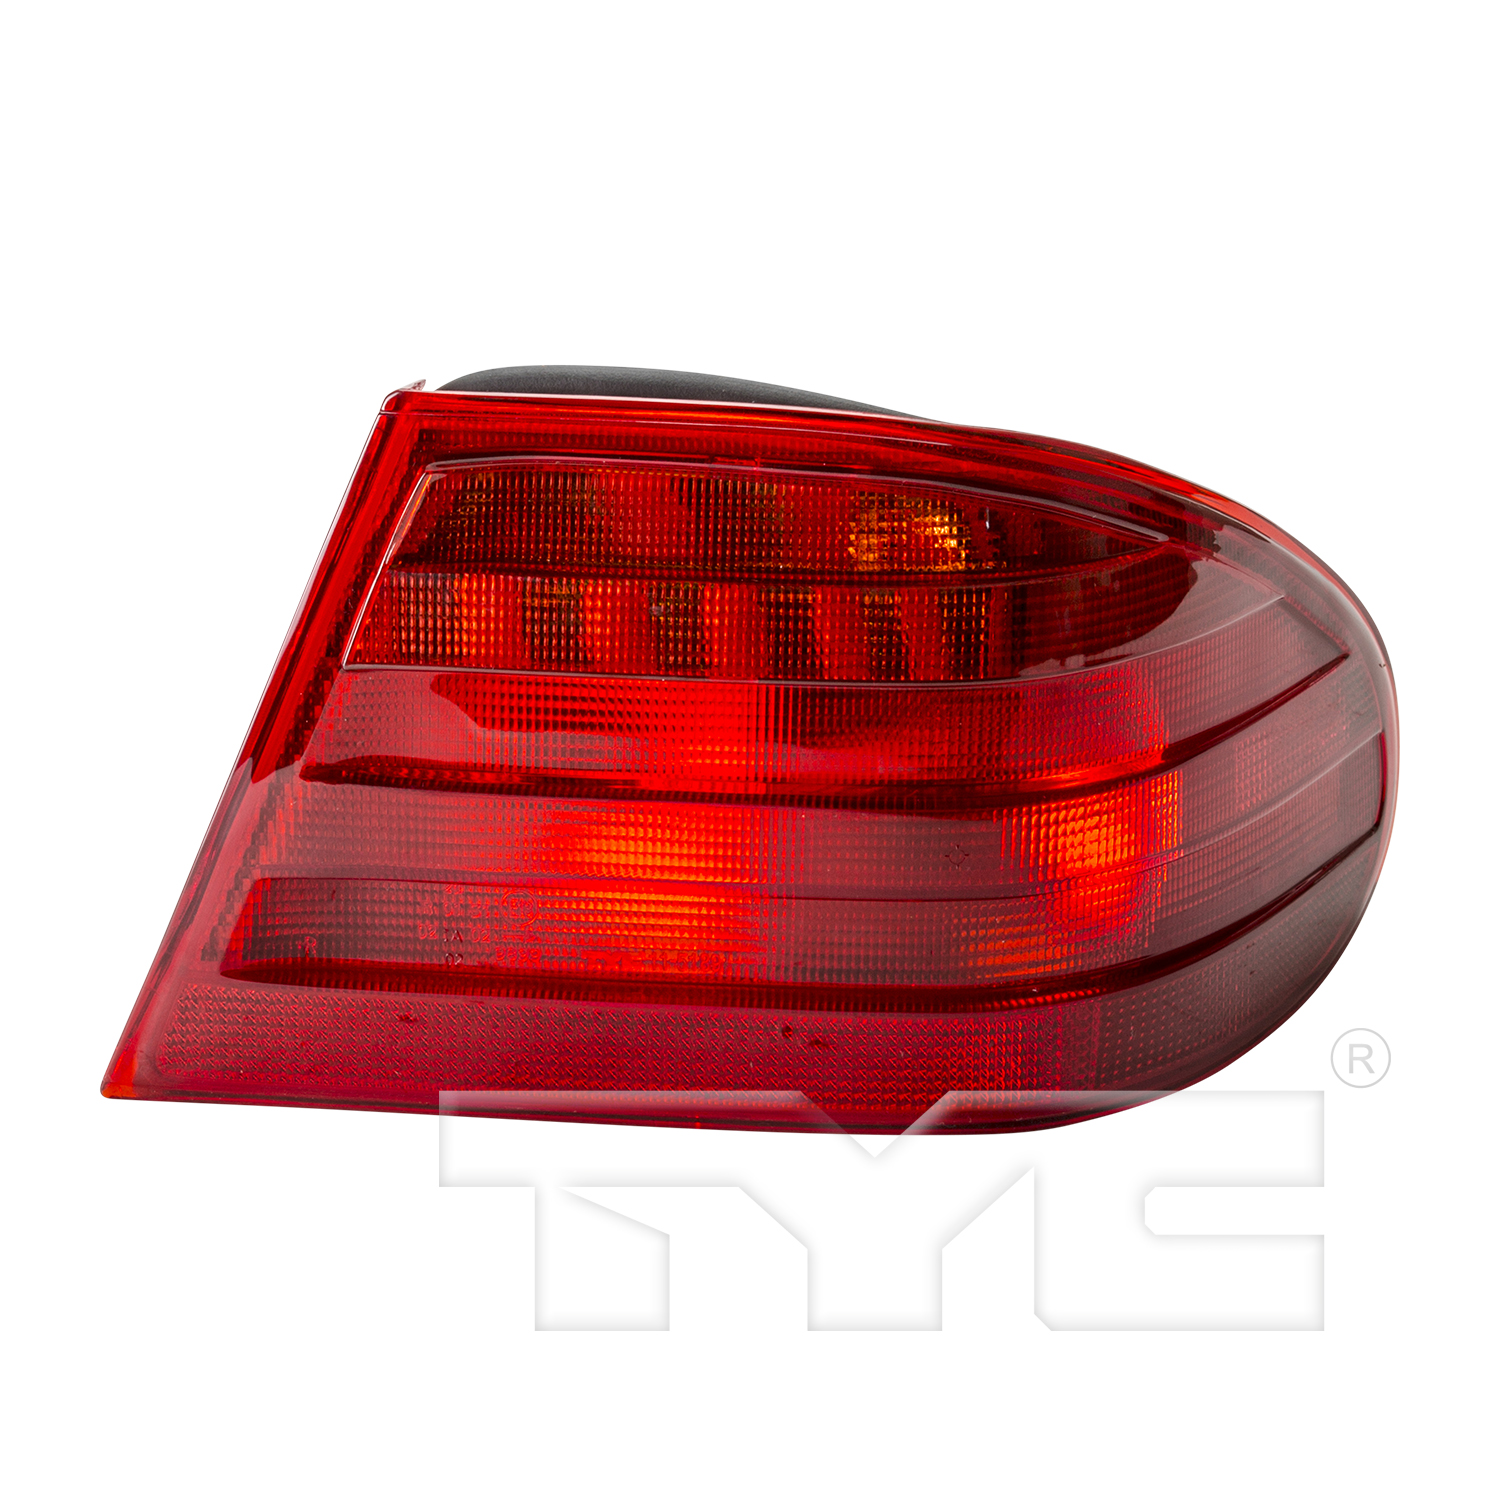 Aftermarket TAILLIGHTS for MERCEDES-BENZ - E320, E320,96-99,RT Taillamp assy outer